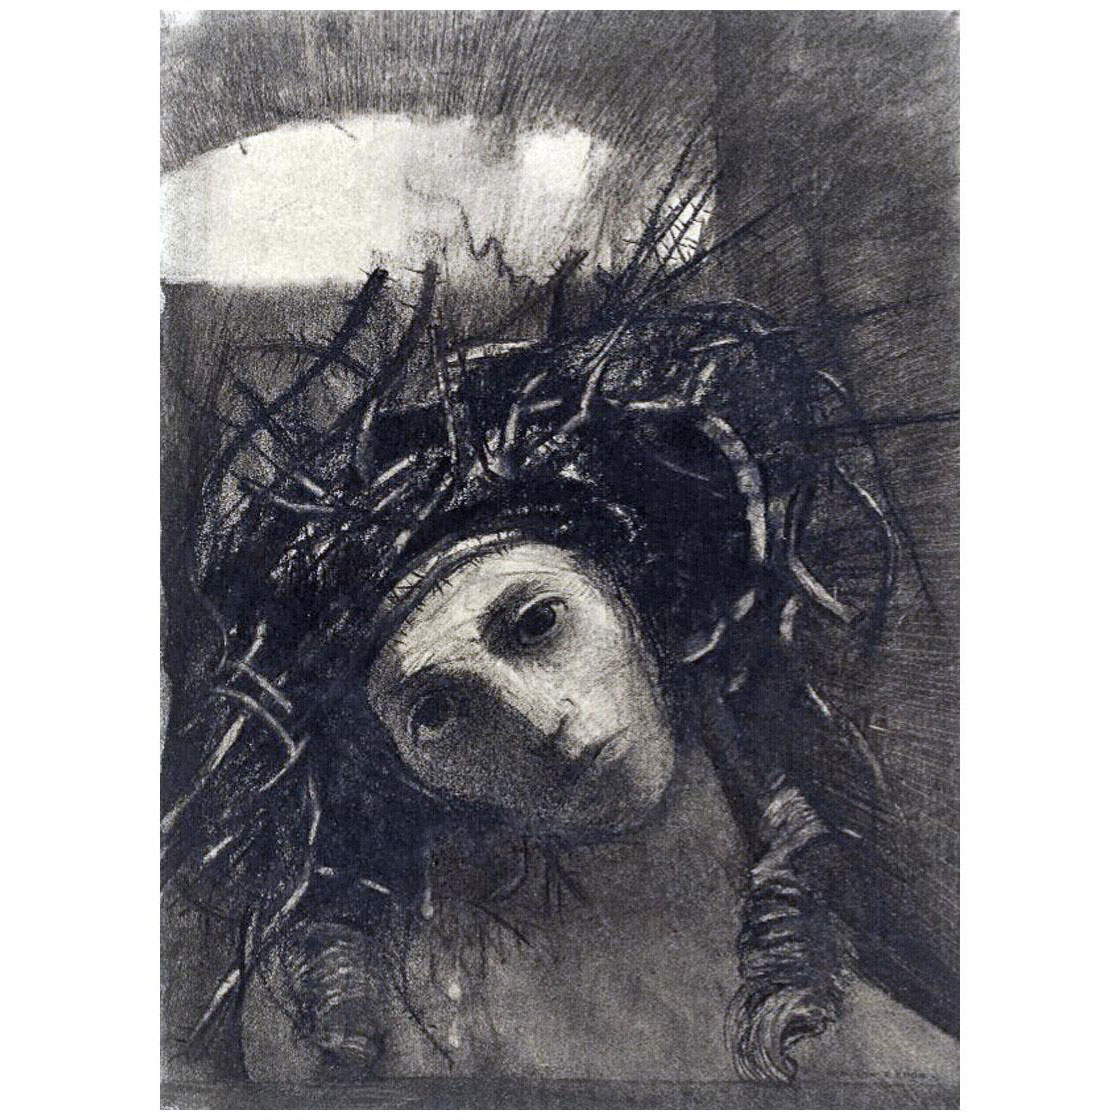 Odilon Redon. Christ crowned with thorns. 1895. British Museum London